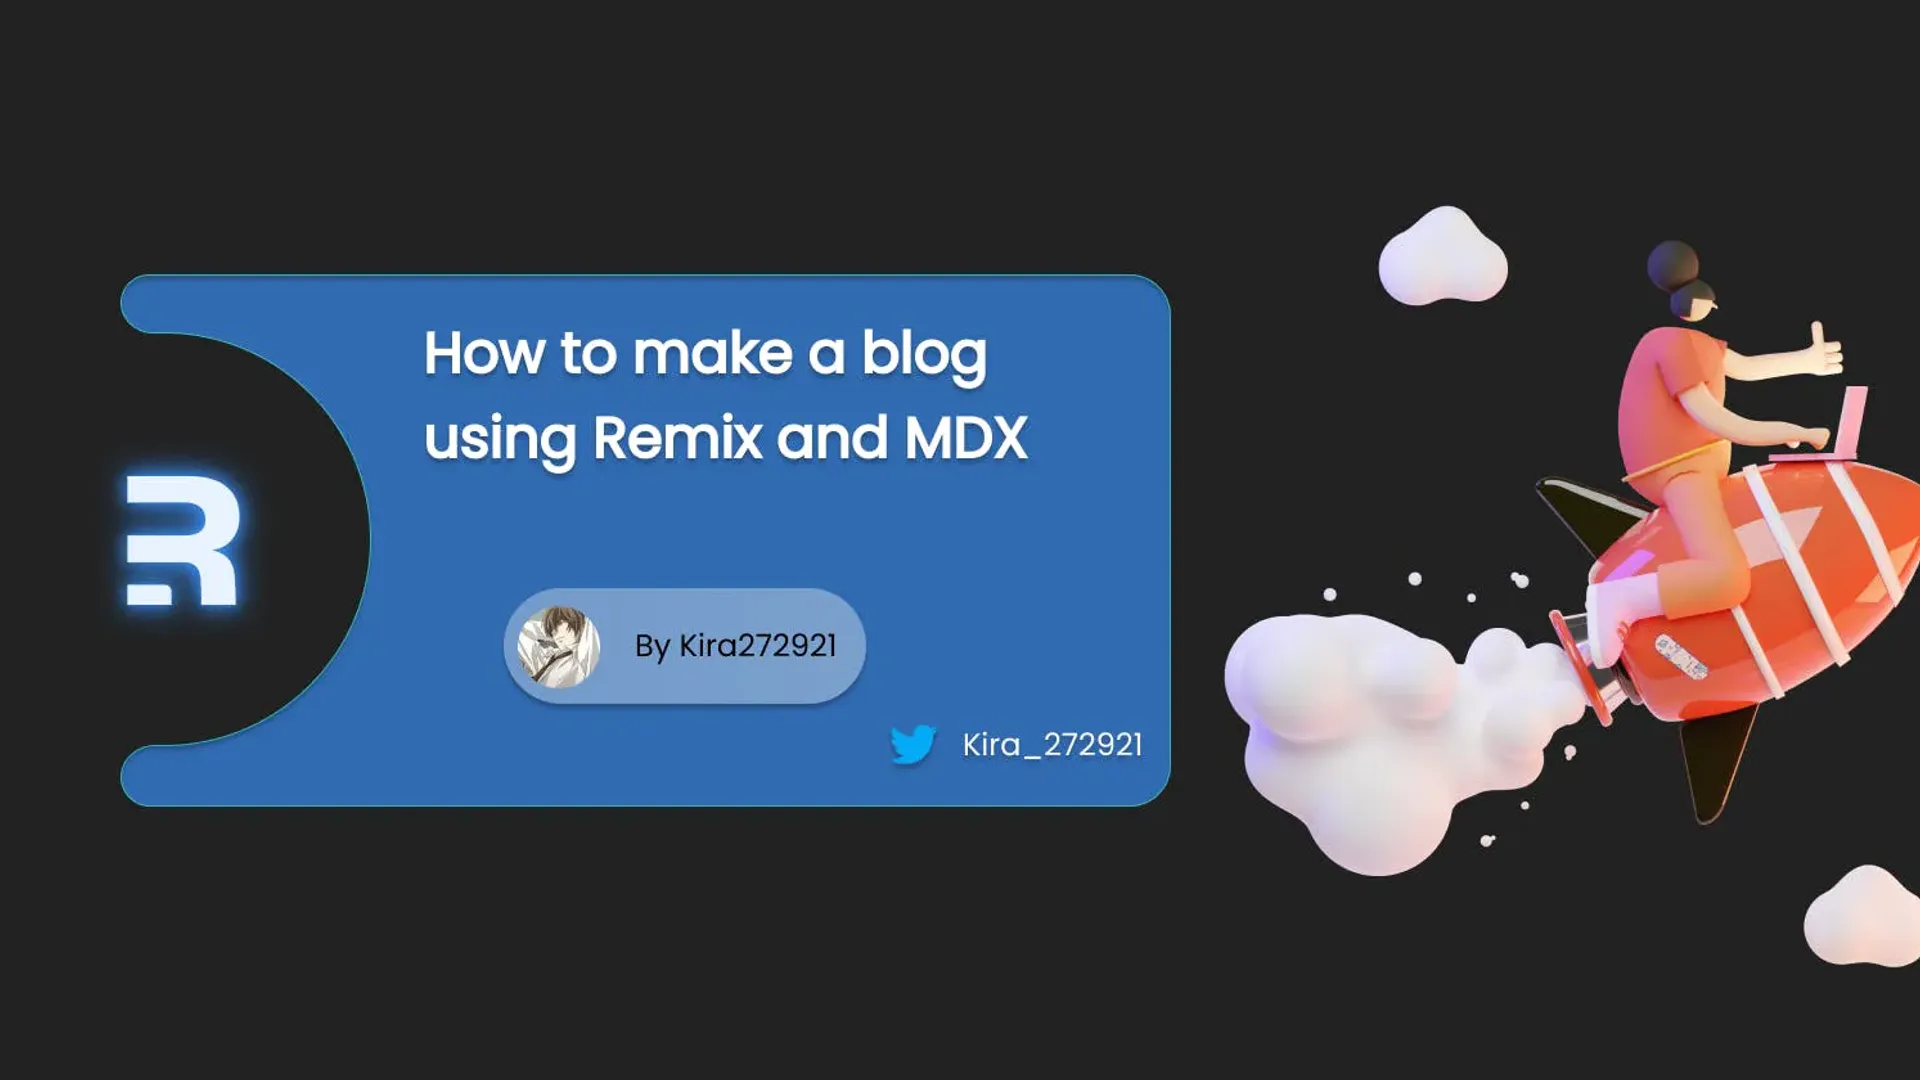 How to build a blog using Remix and MDX